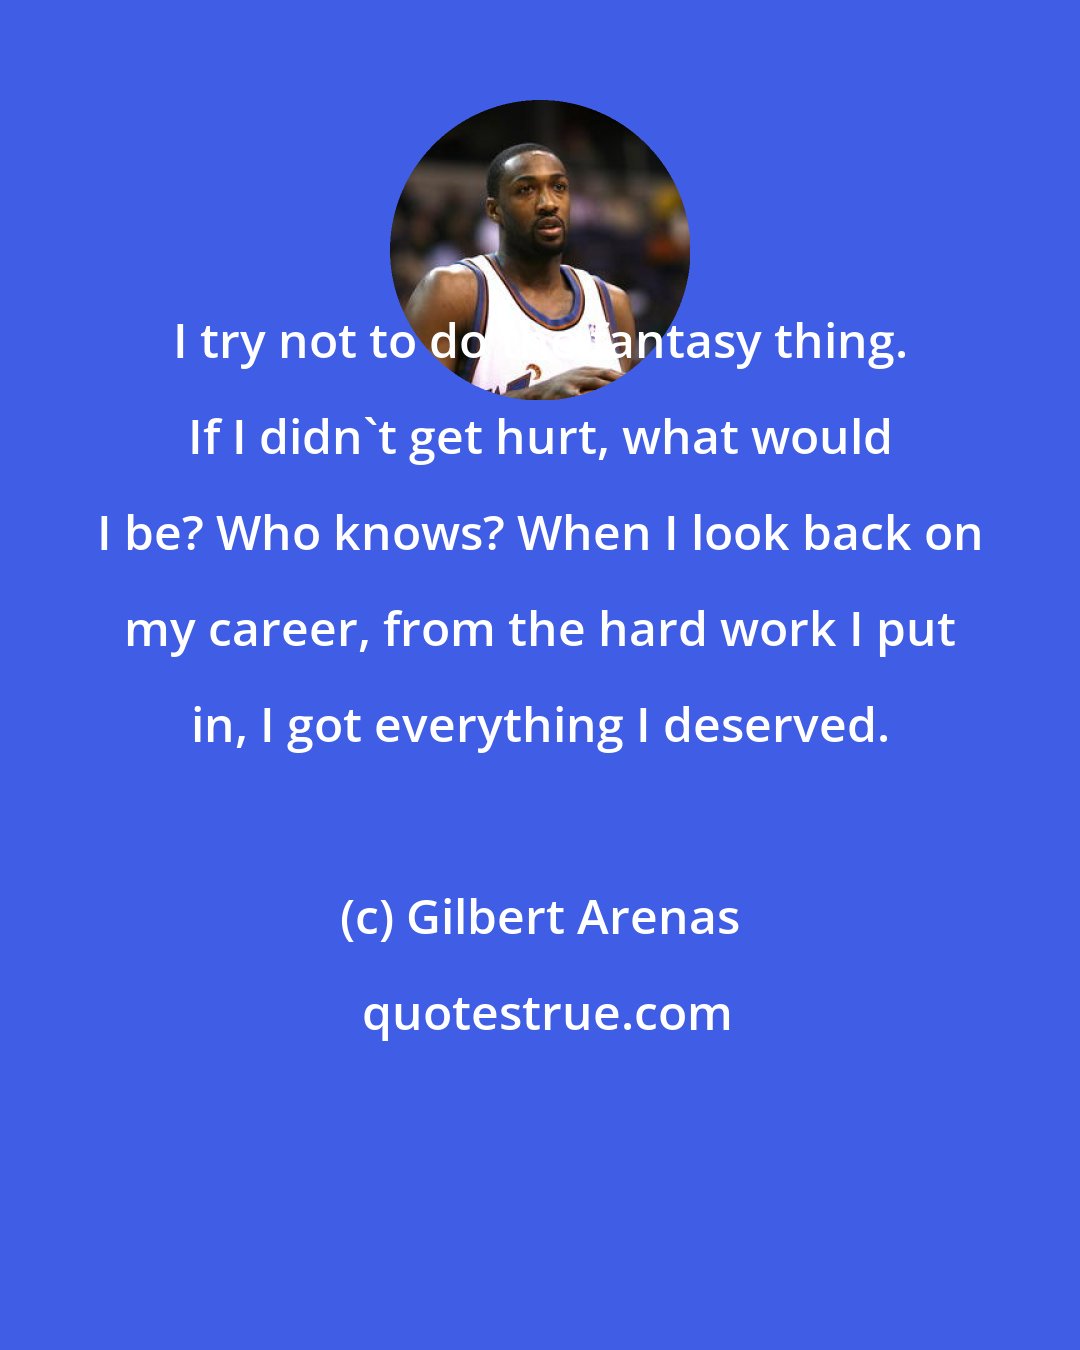 Gilbert Arenas: I try not to do the fantasy thing. If I didn't get hurt, what would I be? Who knows? When I look back on my career, from the hard work I put in, I got everything I deserved.